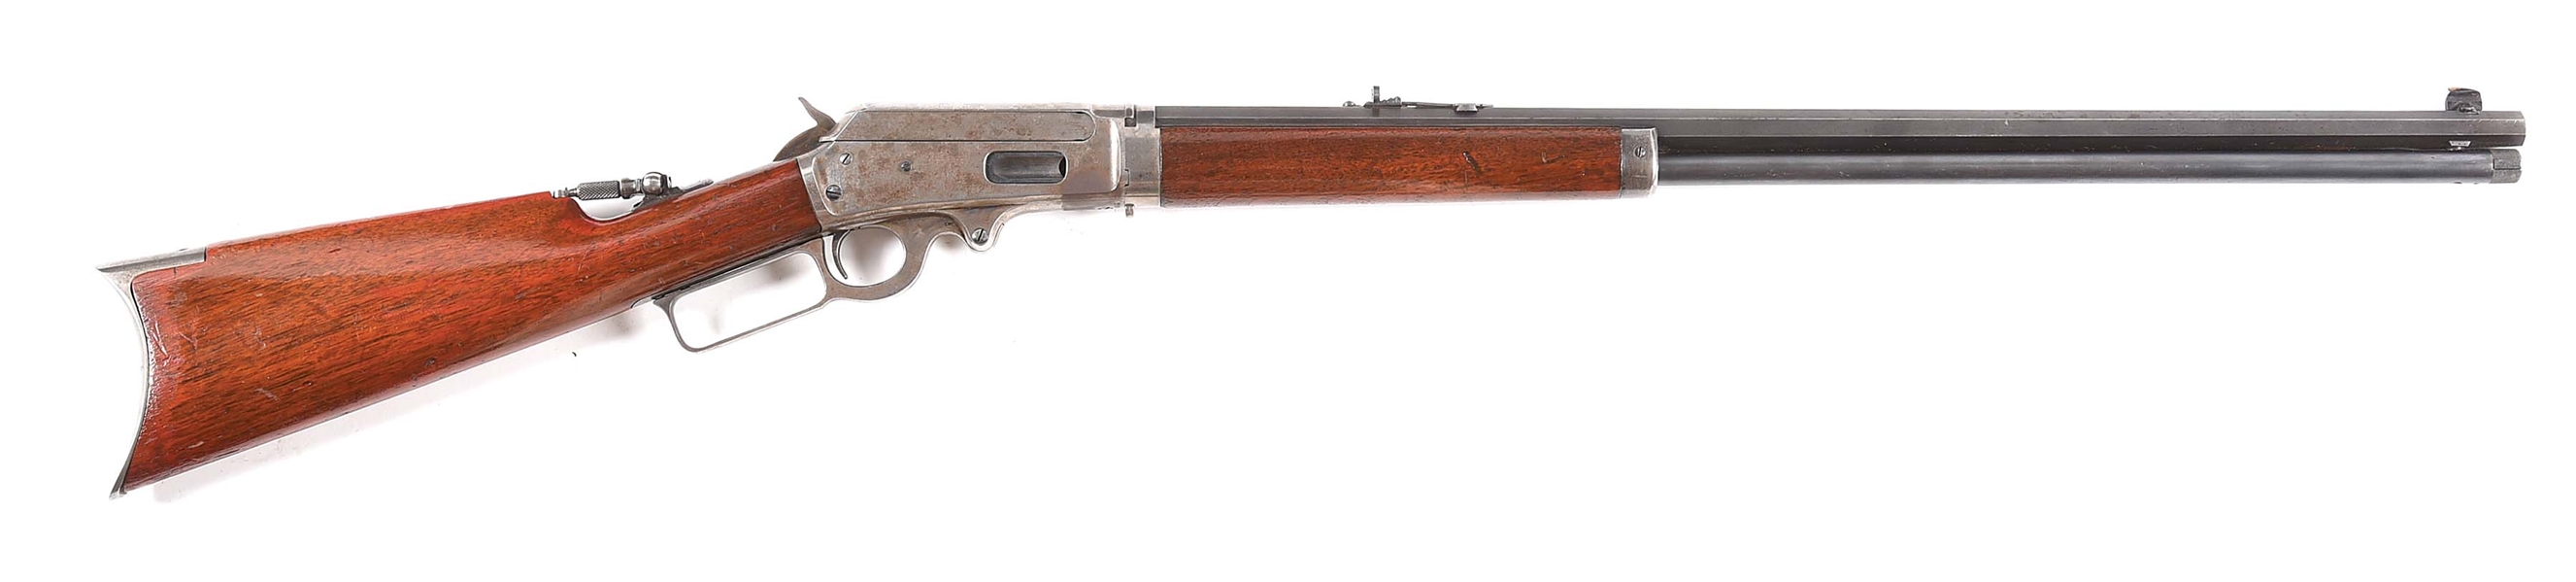 (C) MARLIN 1893 TAKEDOWN LEVER ACTION RIFLE.